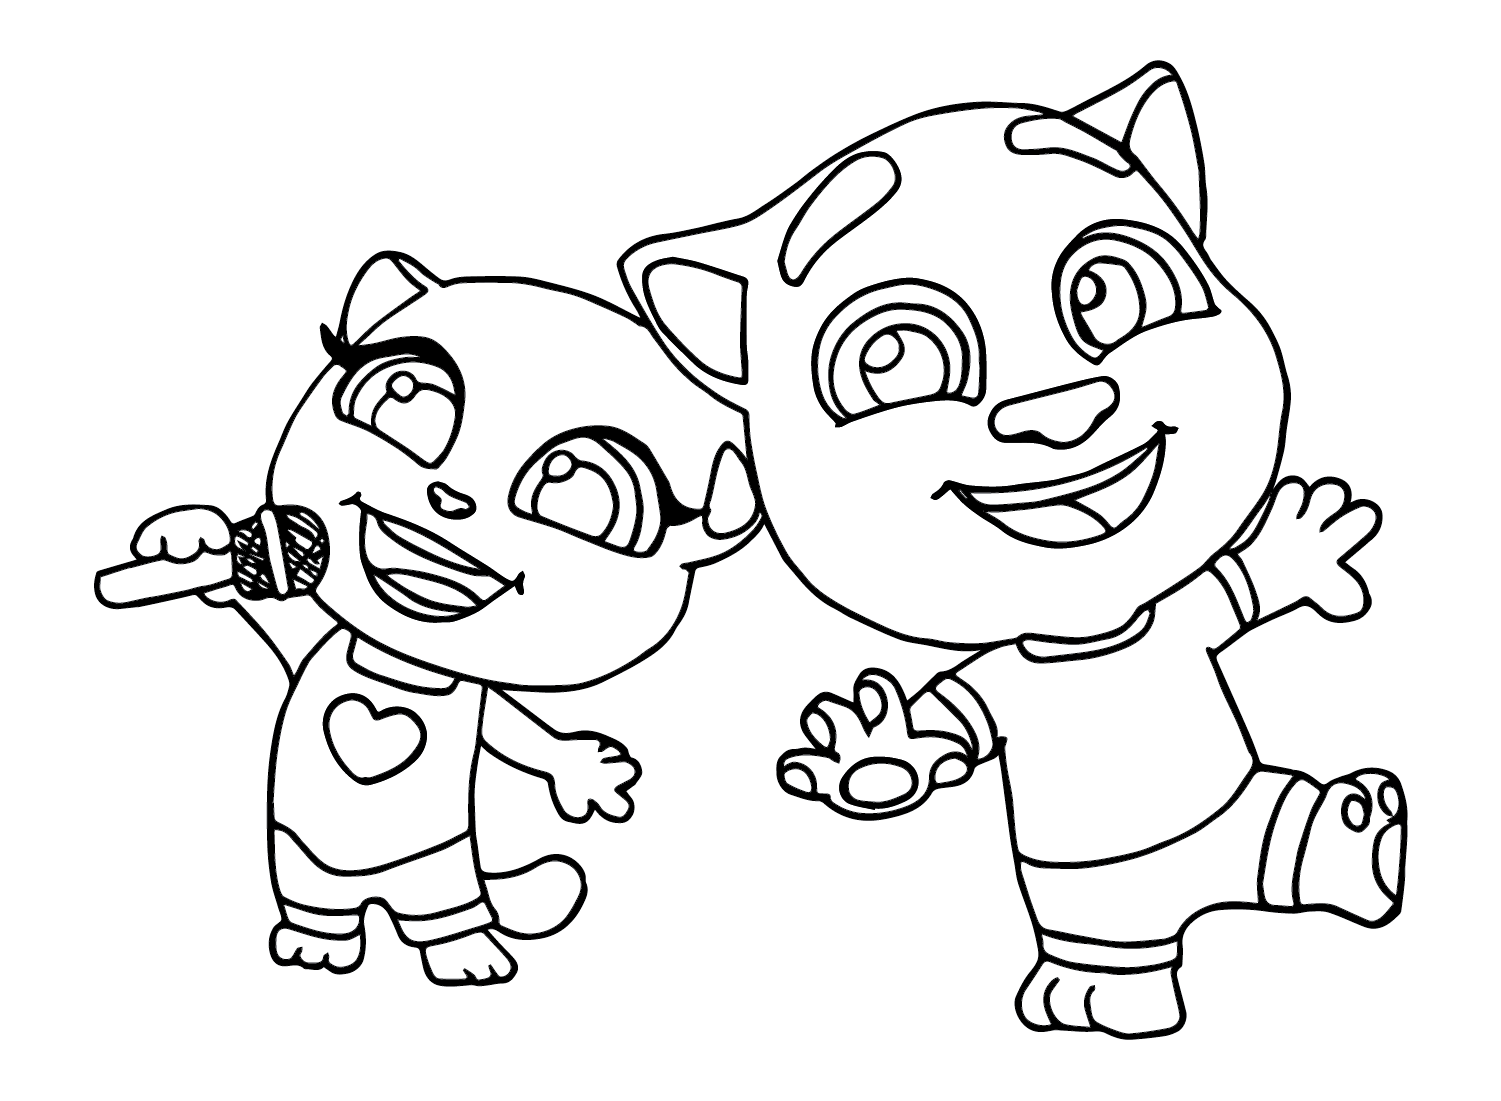 Talking Tom Coloring Pages Printable ...